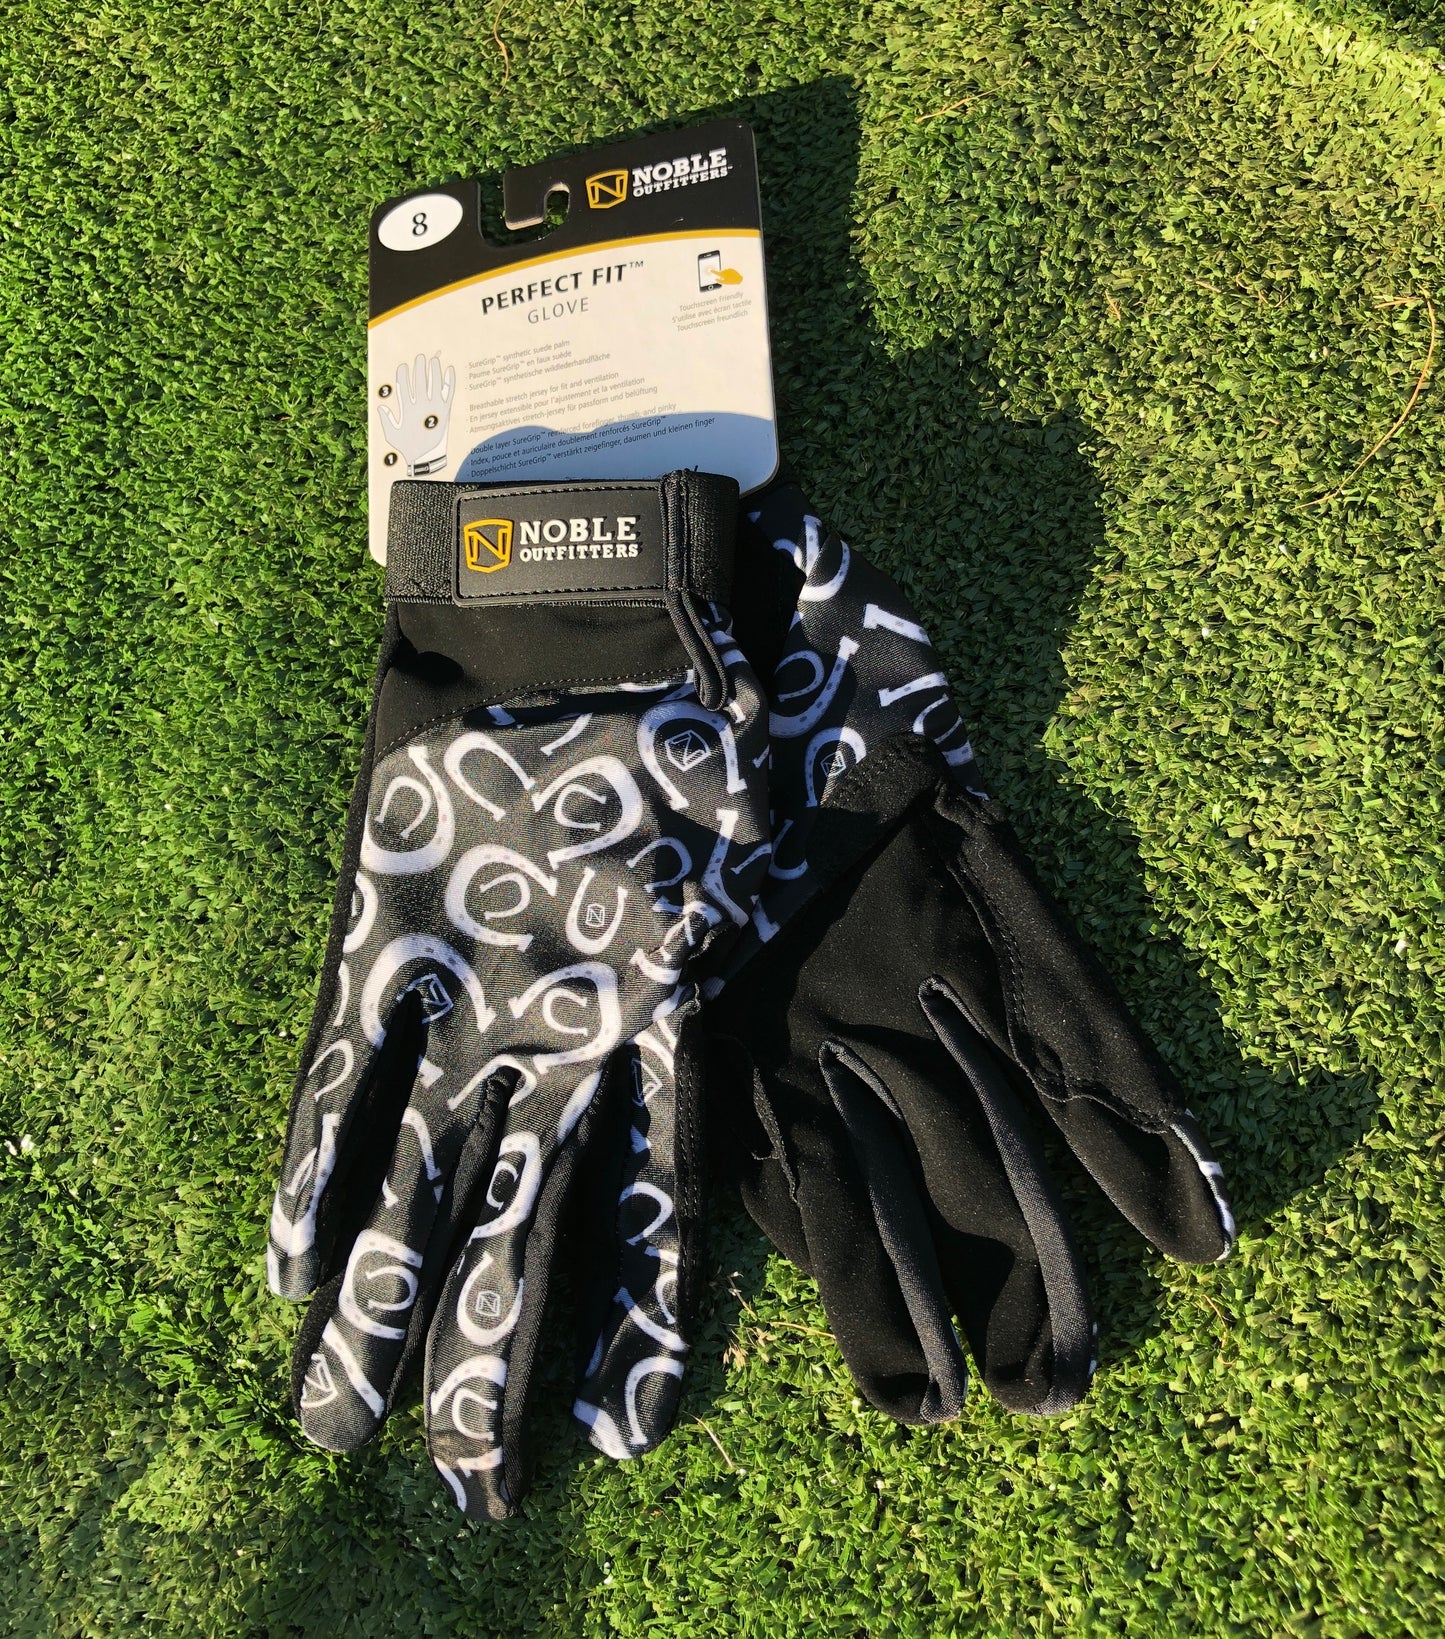 Noble Outfitter perfect fit gloves